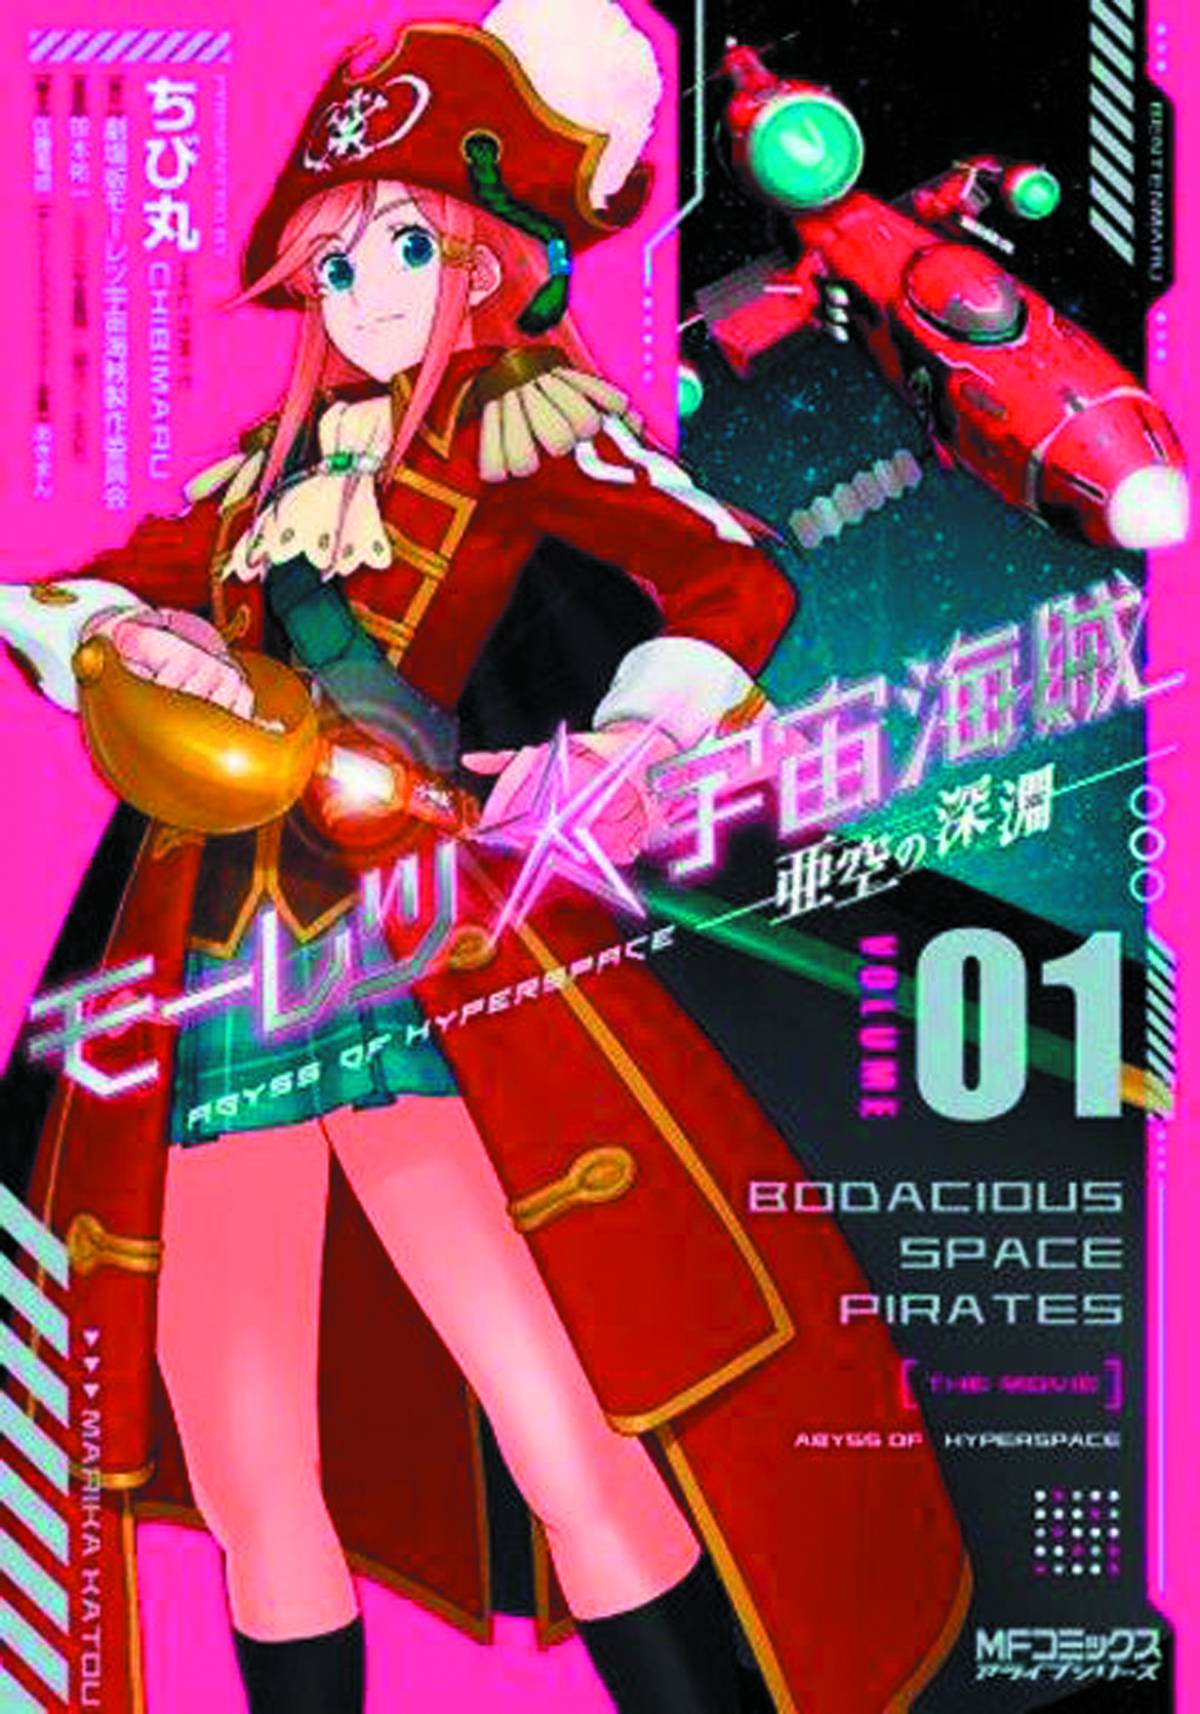 BODACIOUS SPACE PIRATES ABYSS OF HYPERSPACE GN VOL 01